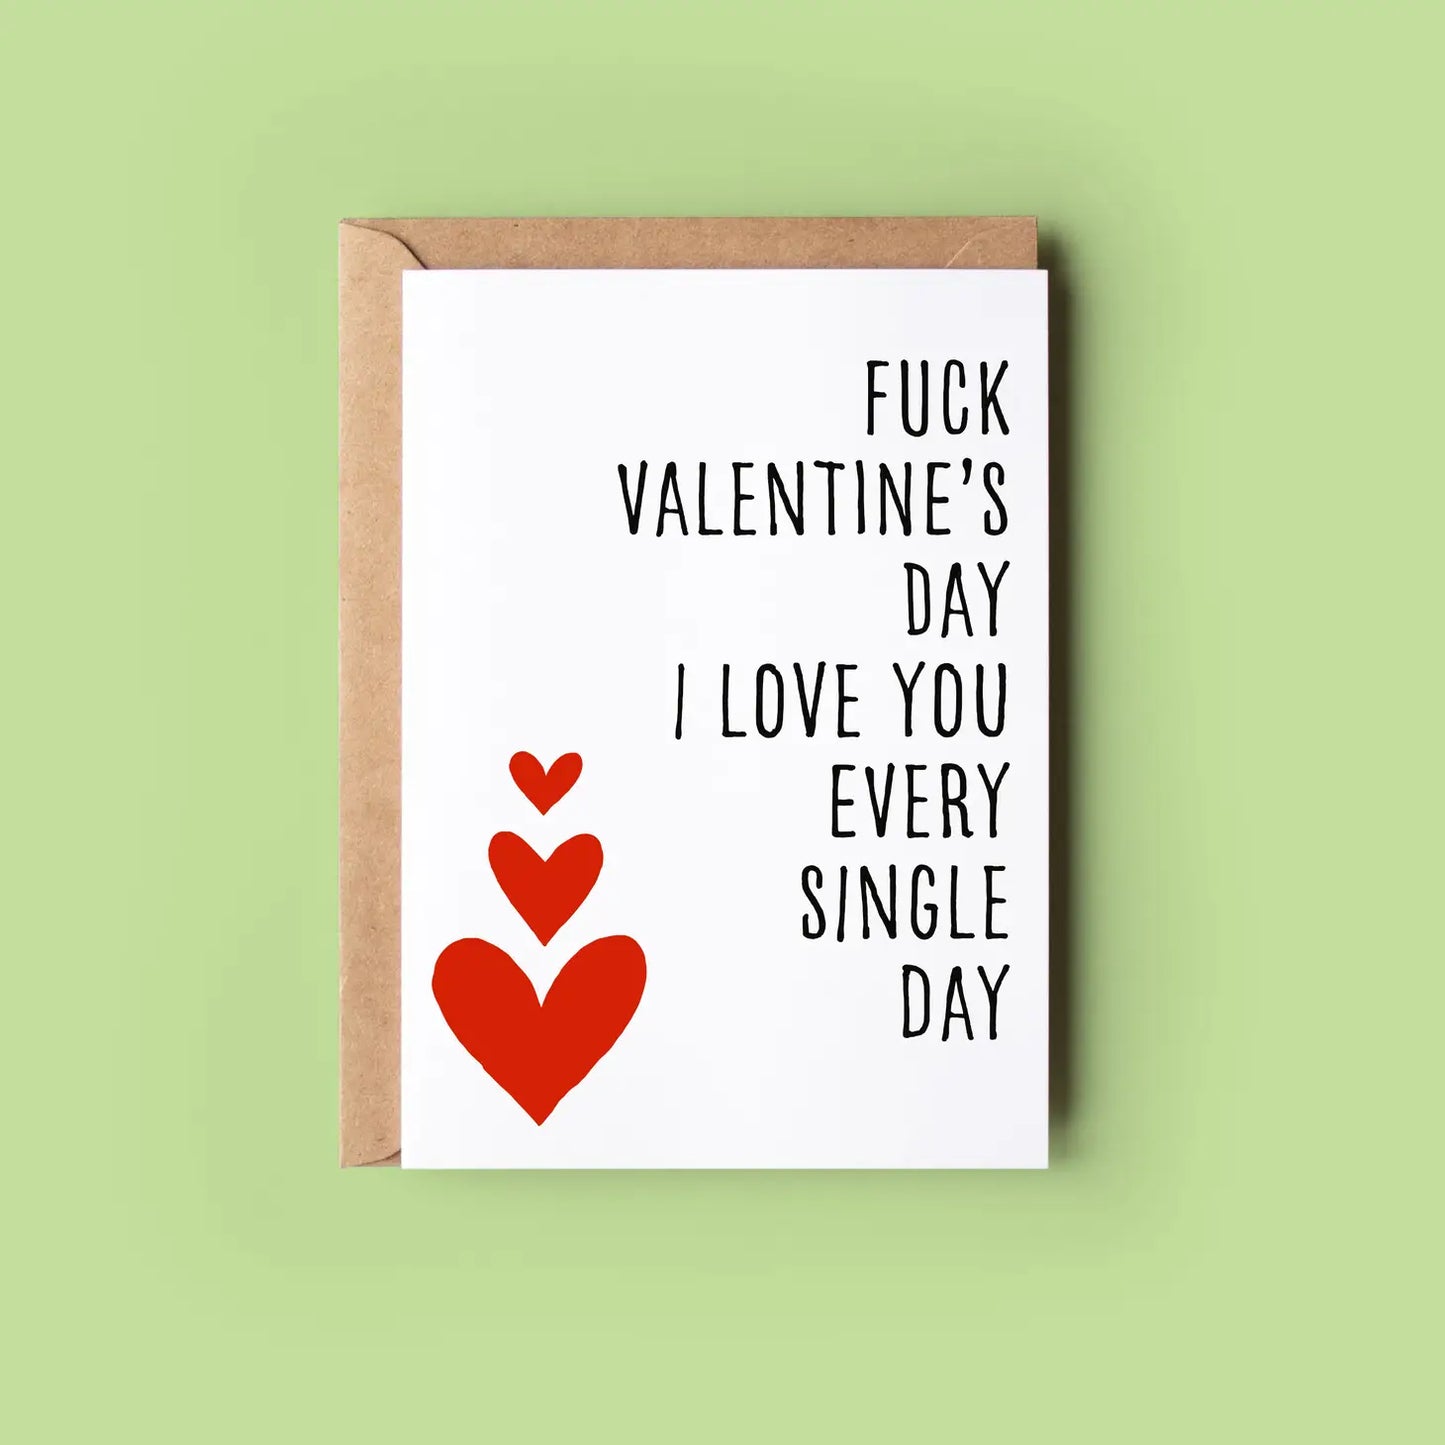 F**k Valentine's Day - Greeting Cards Made in Ireland